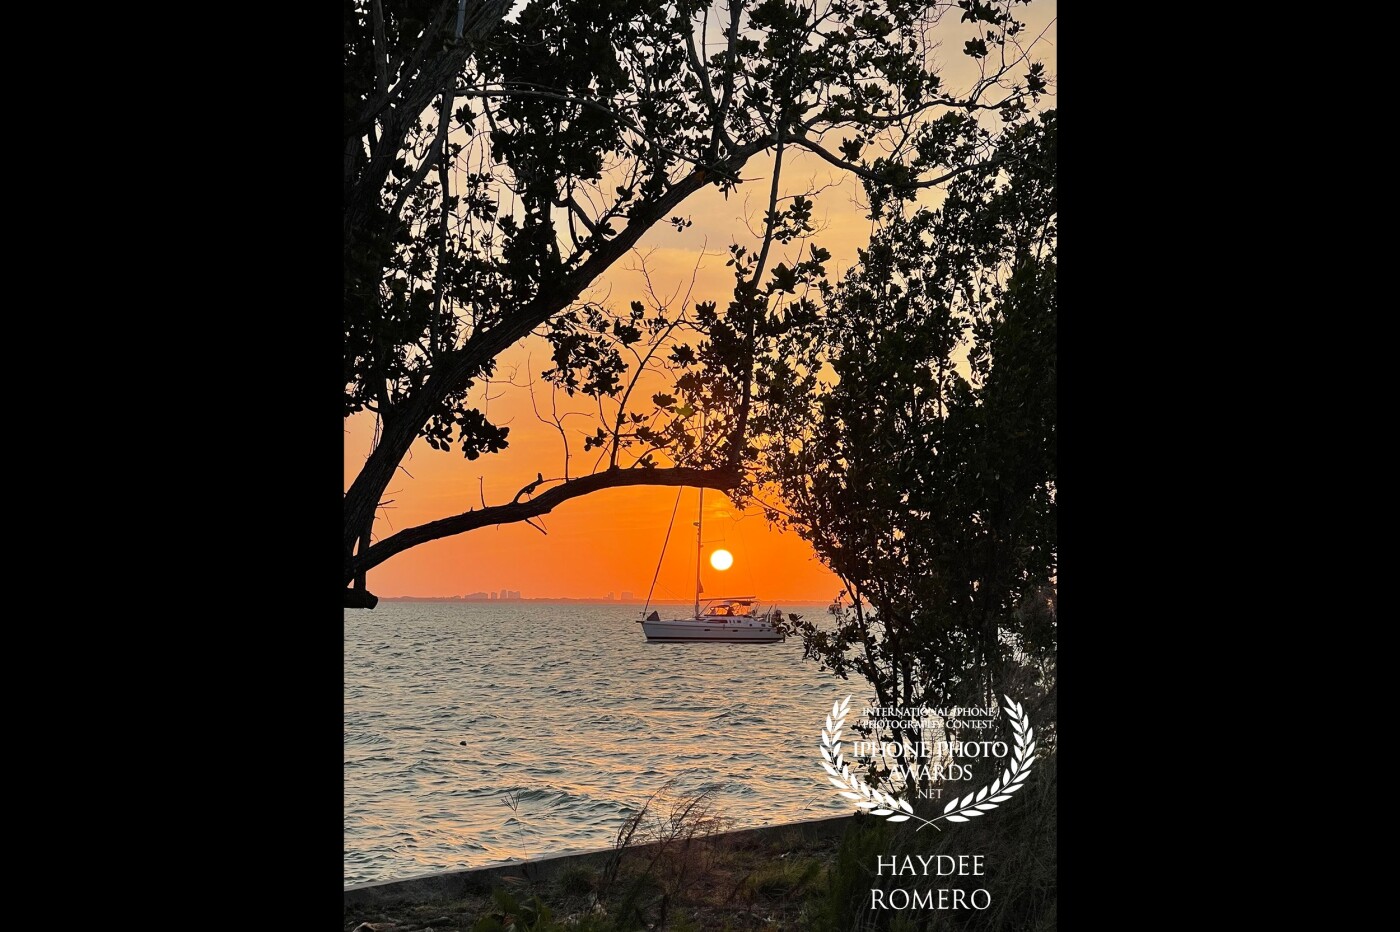 The sunsets behind an anchored sailboat framed by trees on the shoreline at the Bill Baggs state park on Key Biscayne, Florida.